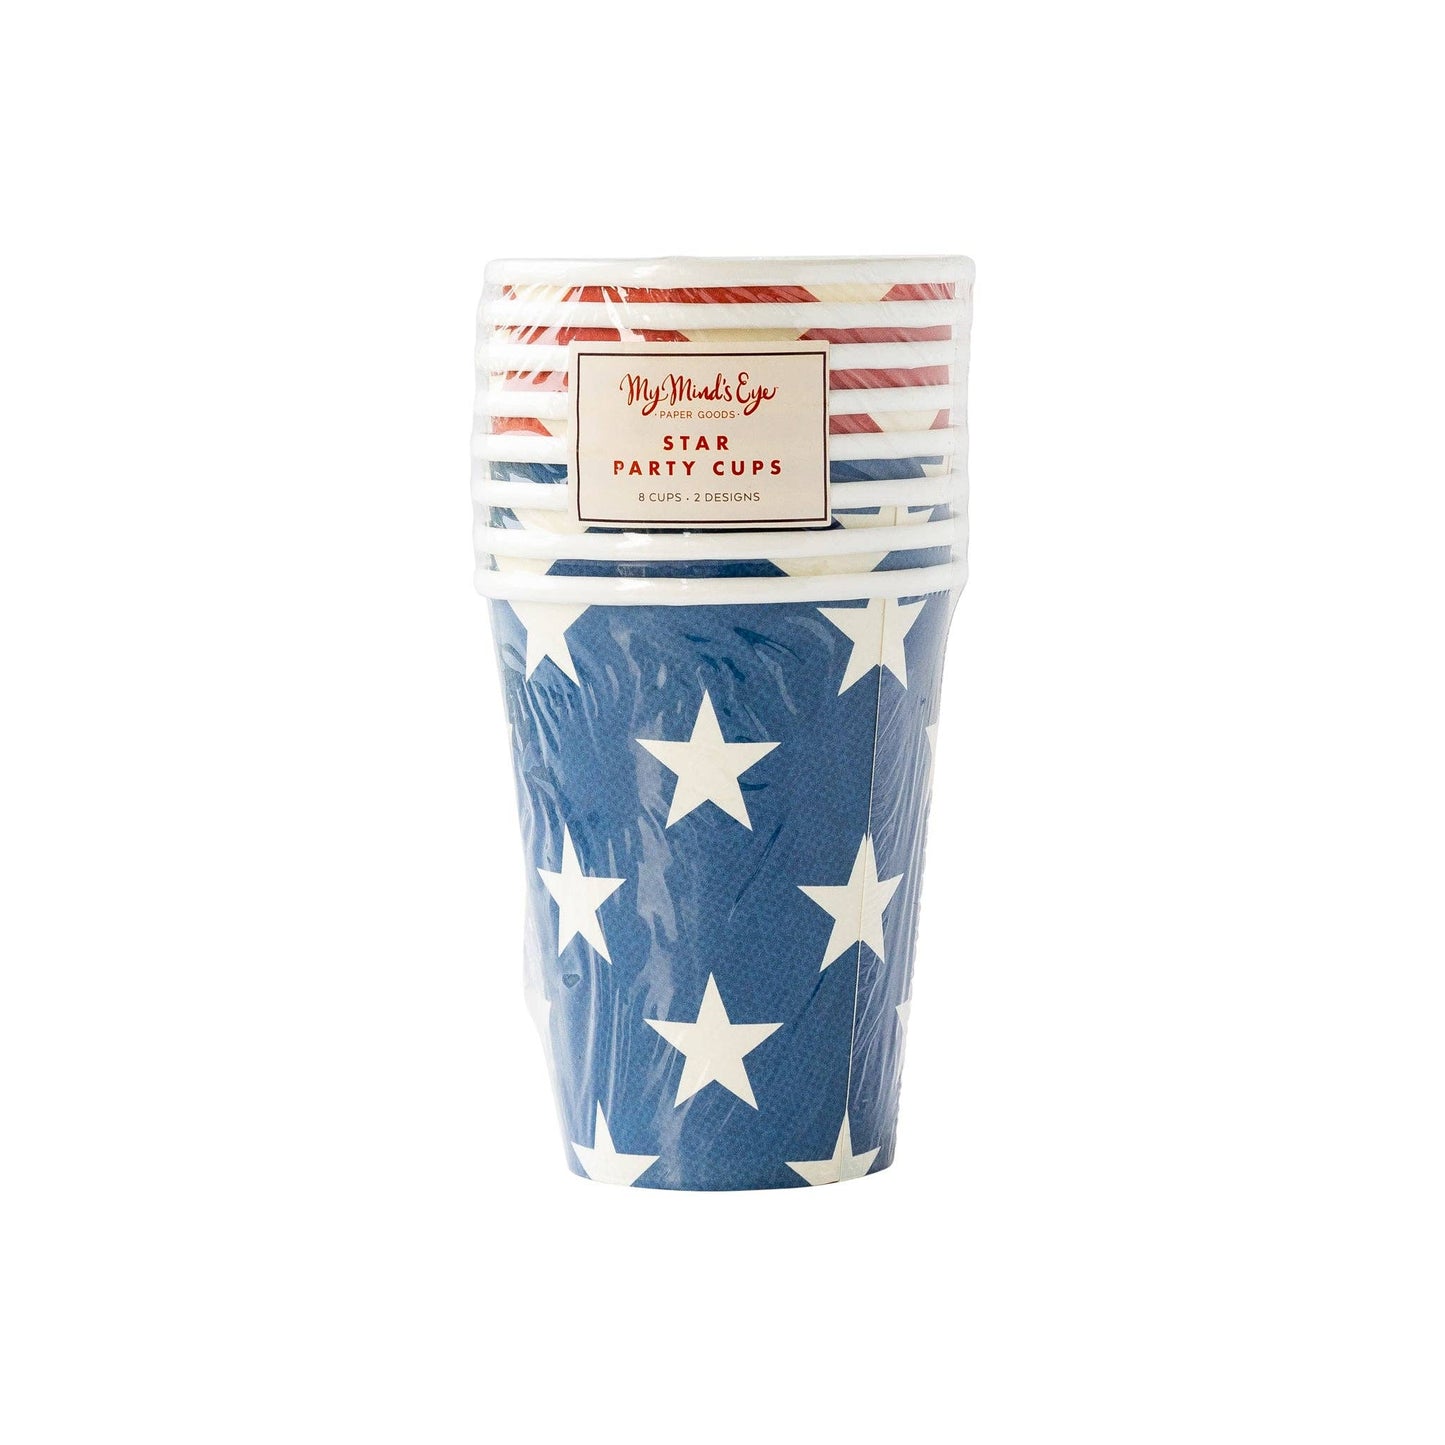 Paper Cups: Red and Blue Star